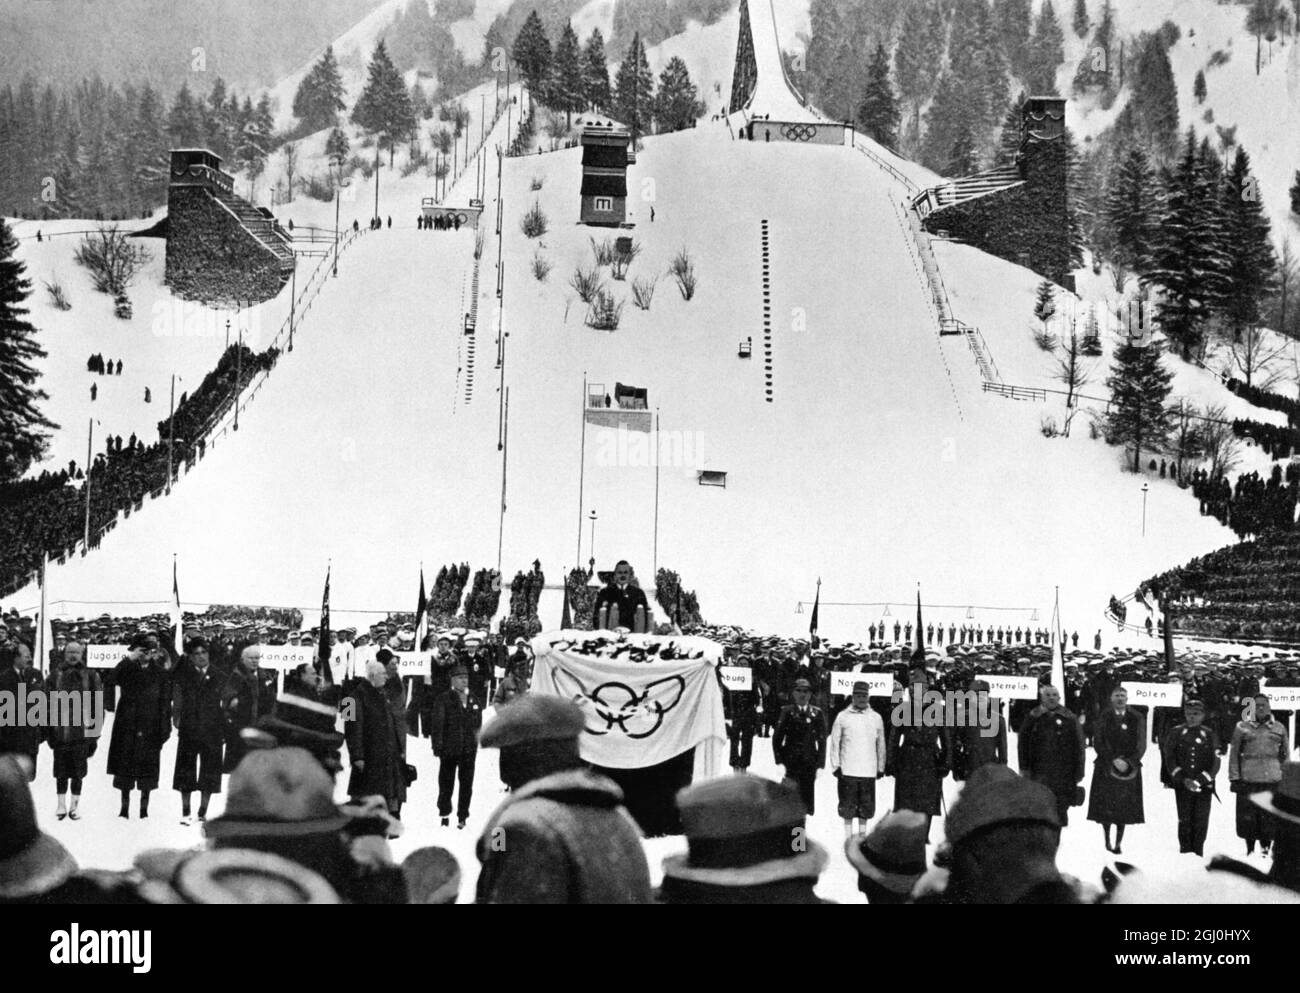 Dr. Karl Ritter von Halt, President of the Organisation for the IV Winter Olympics 1936 gives his inaugural address and welcome speech in the Olympic Ski Stadium to the teams of 28 nations. ©TopFoto Stock Photo